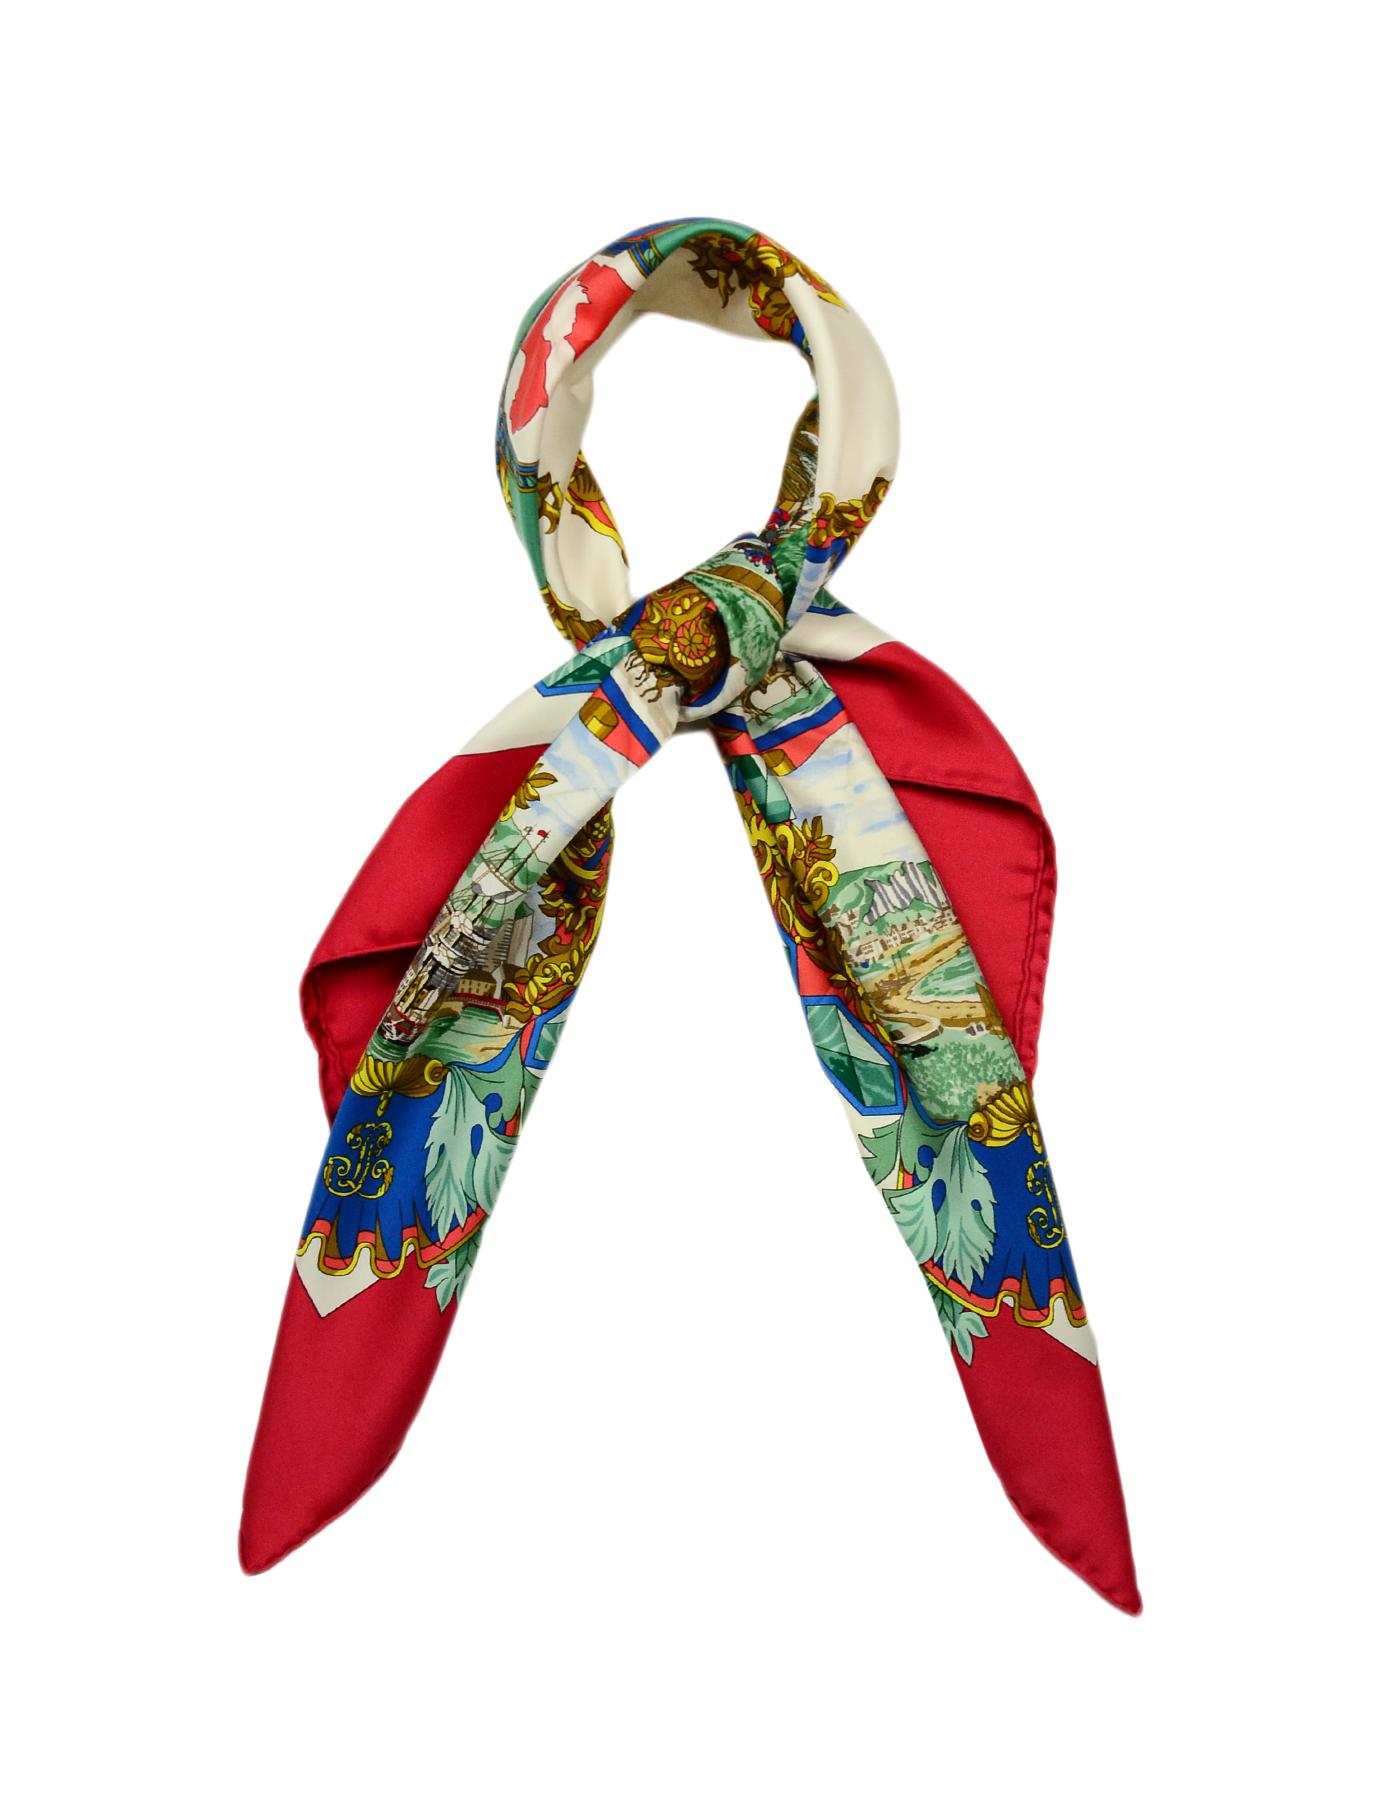 Brown Hermes L'Entente Cordiale 90cm Silk Scarf with Red Border by Loic Dubigeon